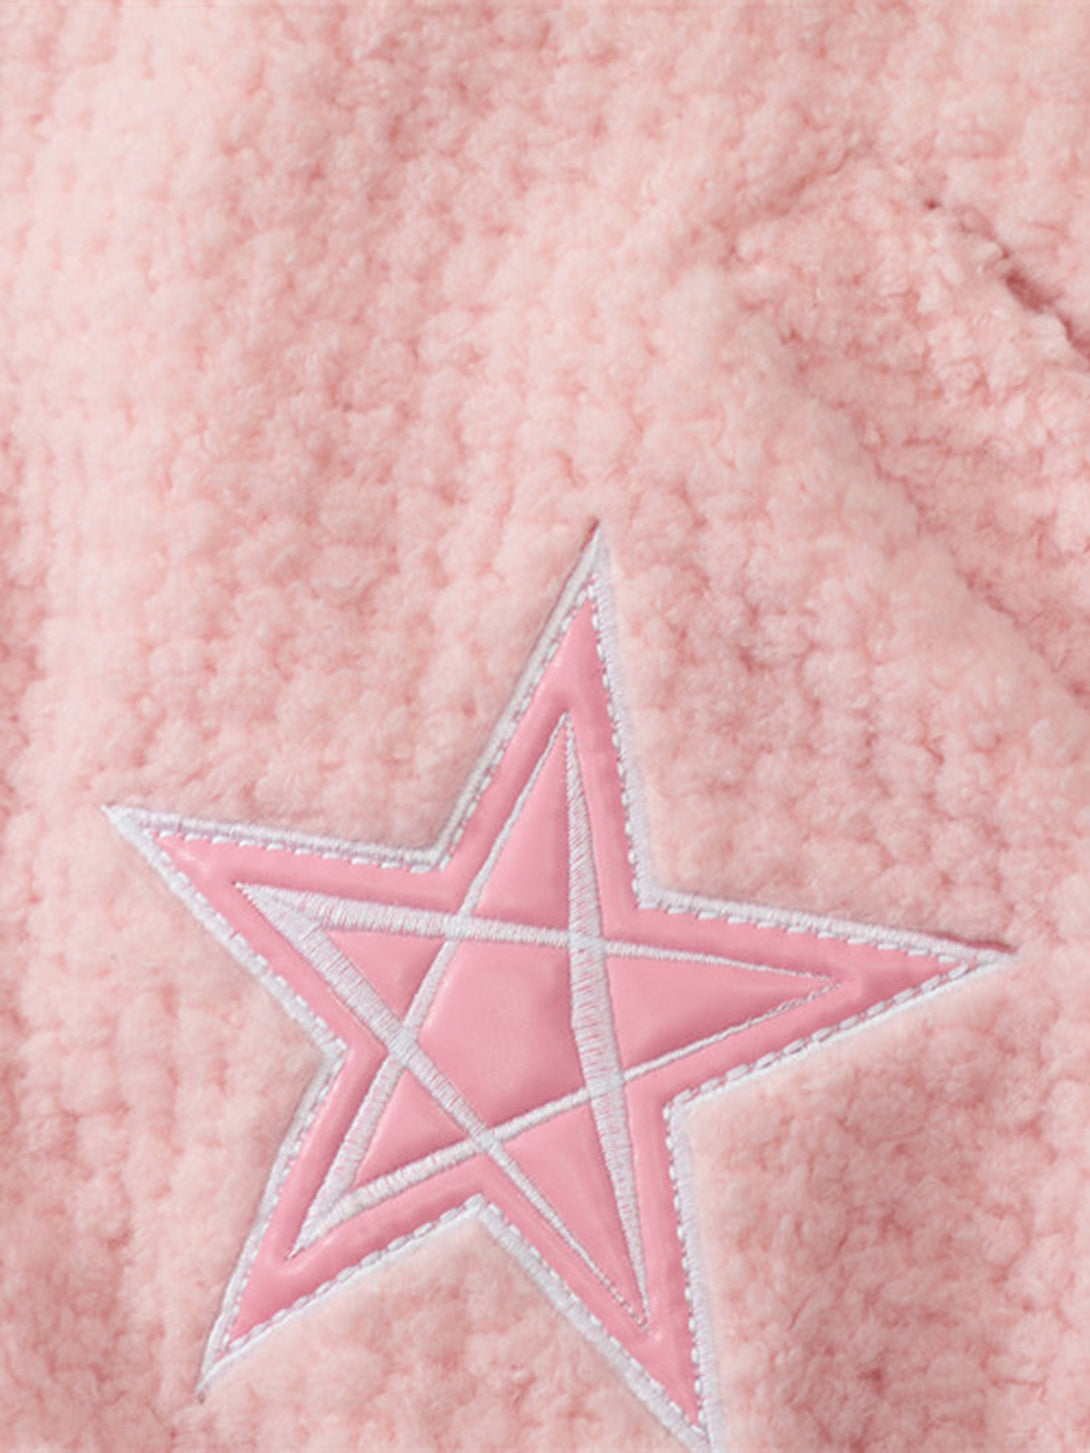 Majesda® - Embroidered Five-pointed Star Design Lambswool Cotton Jacket- Outfit Ideas - Streetwear Fashion - majesda.com